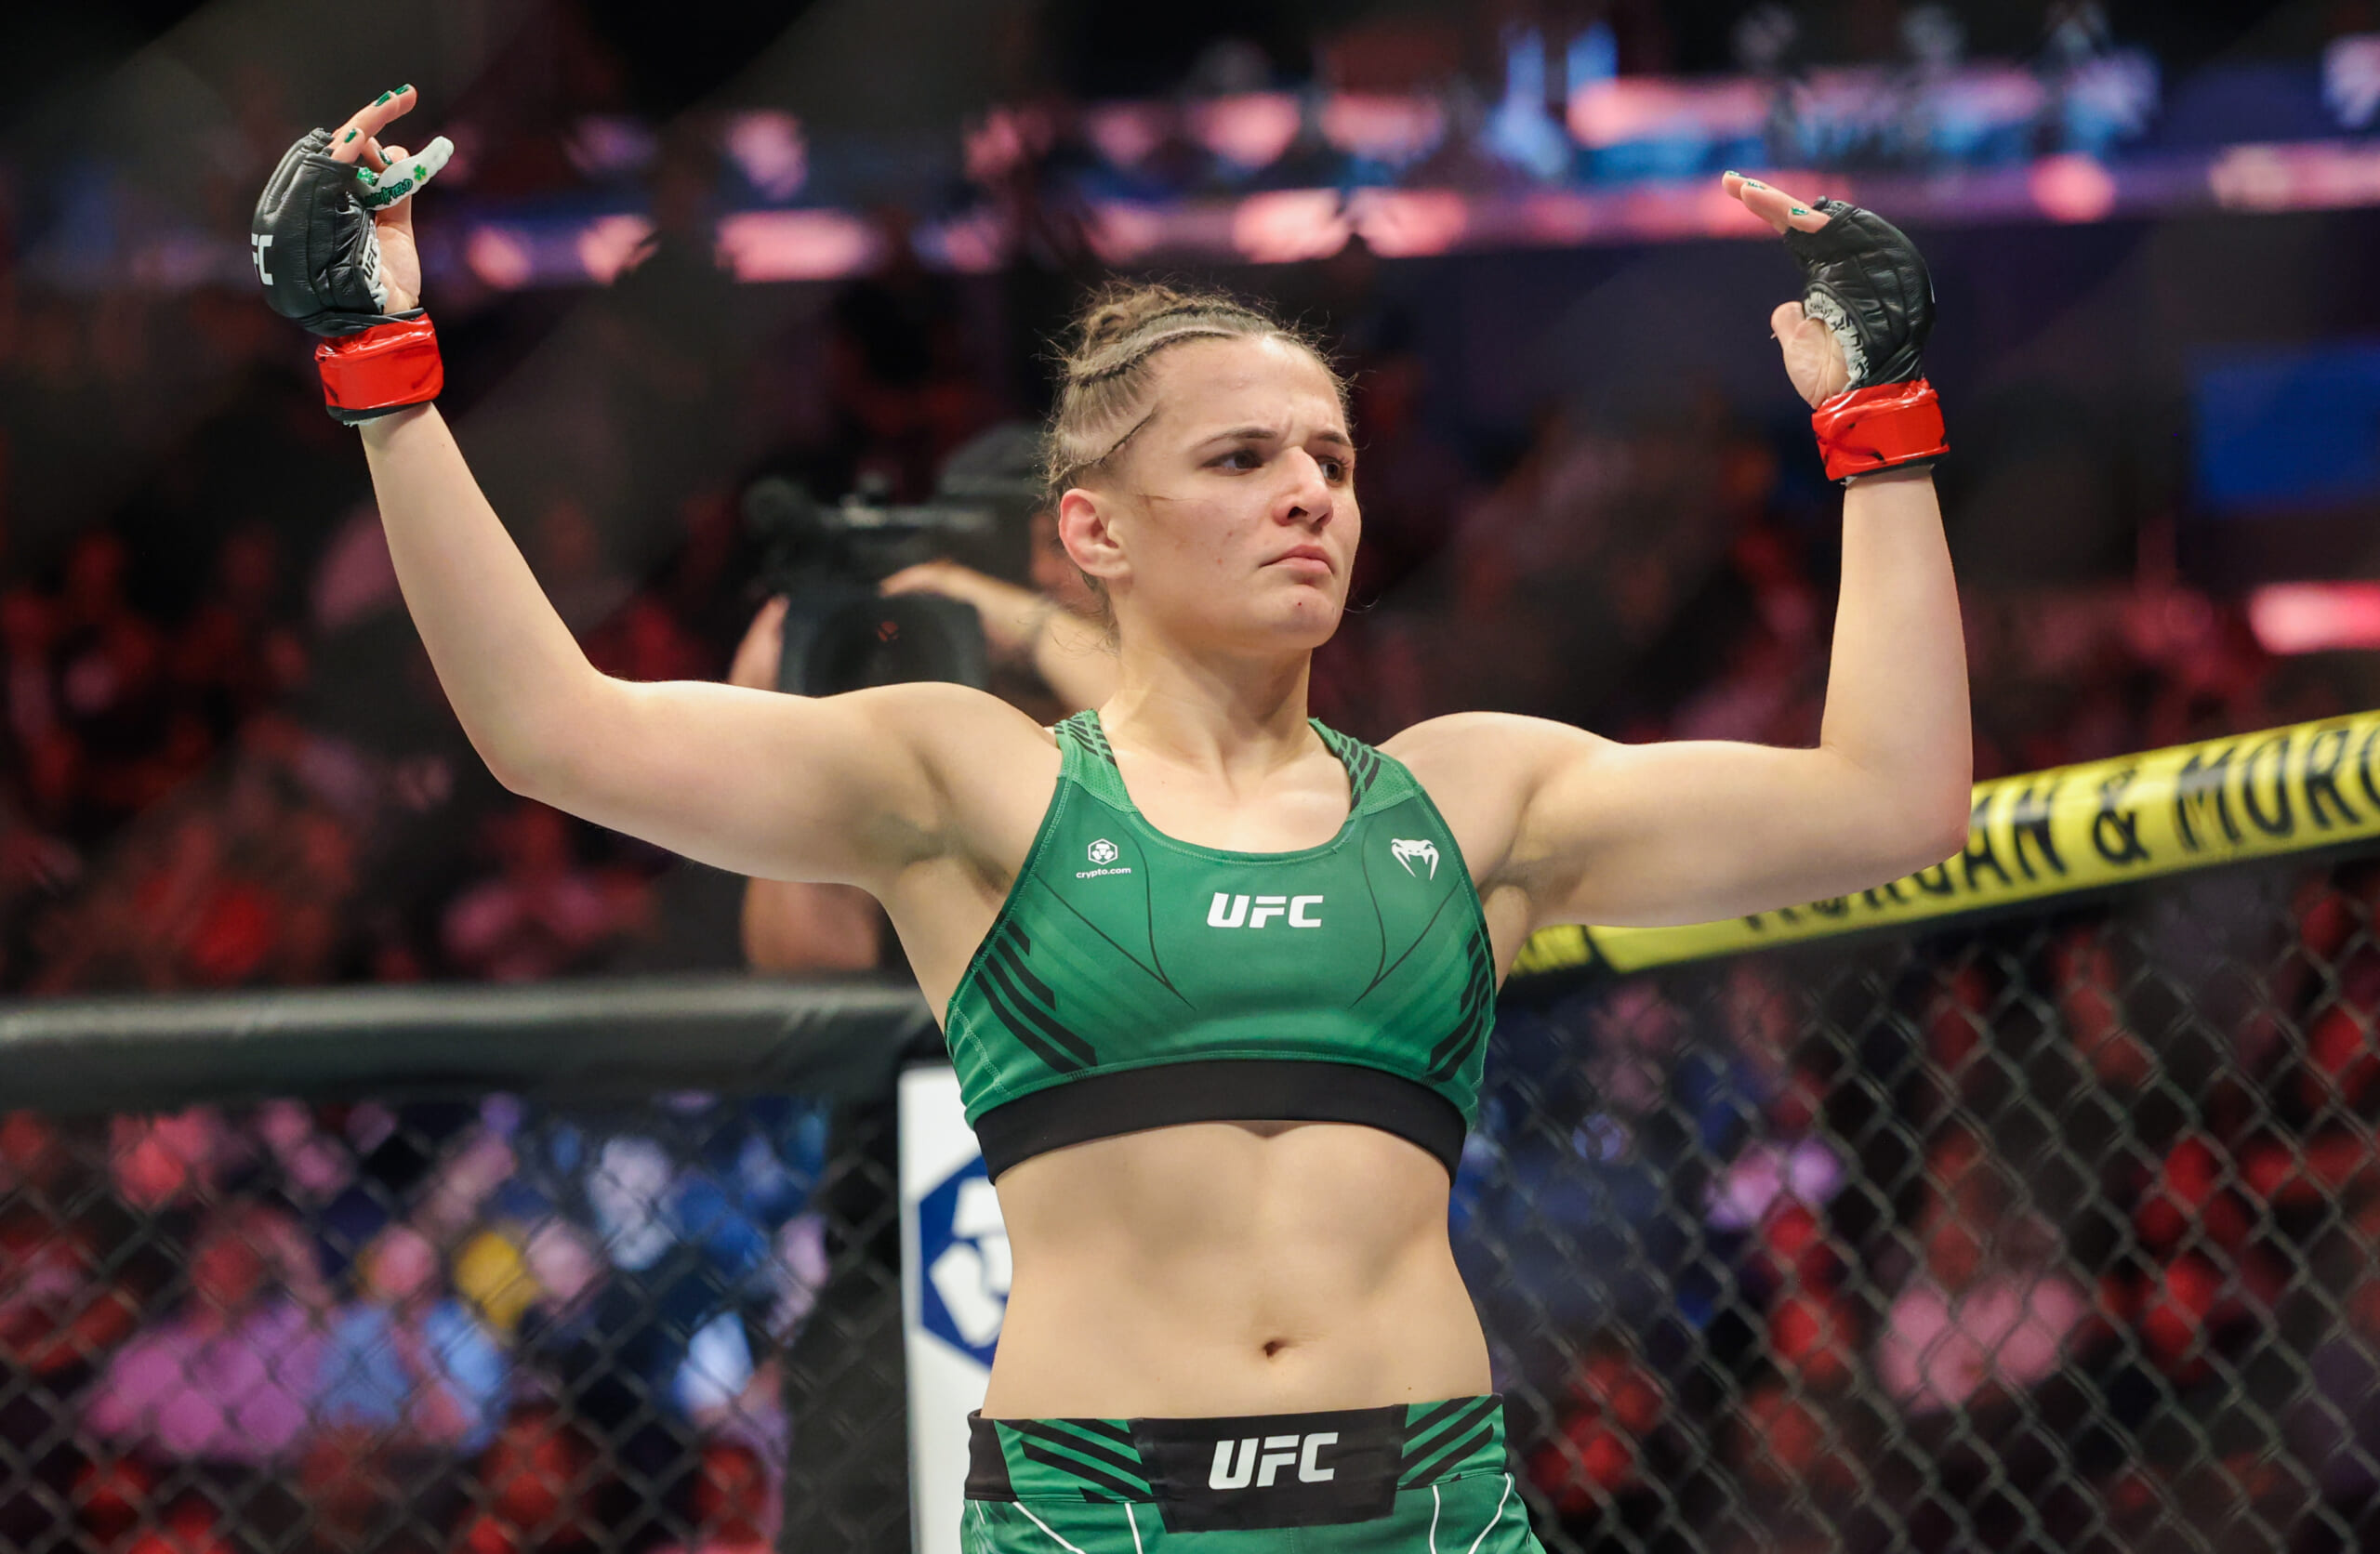 After Noche UFC, should Erin Blanchfield – Manon Fiorot be booked next?